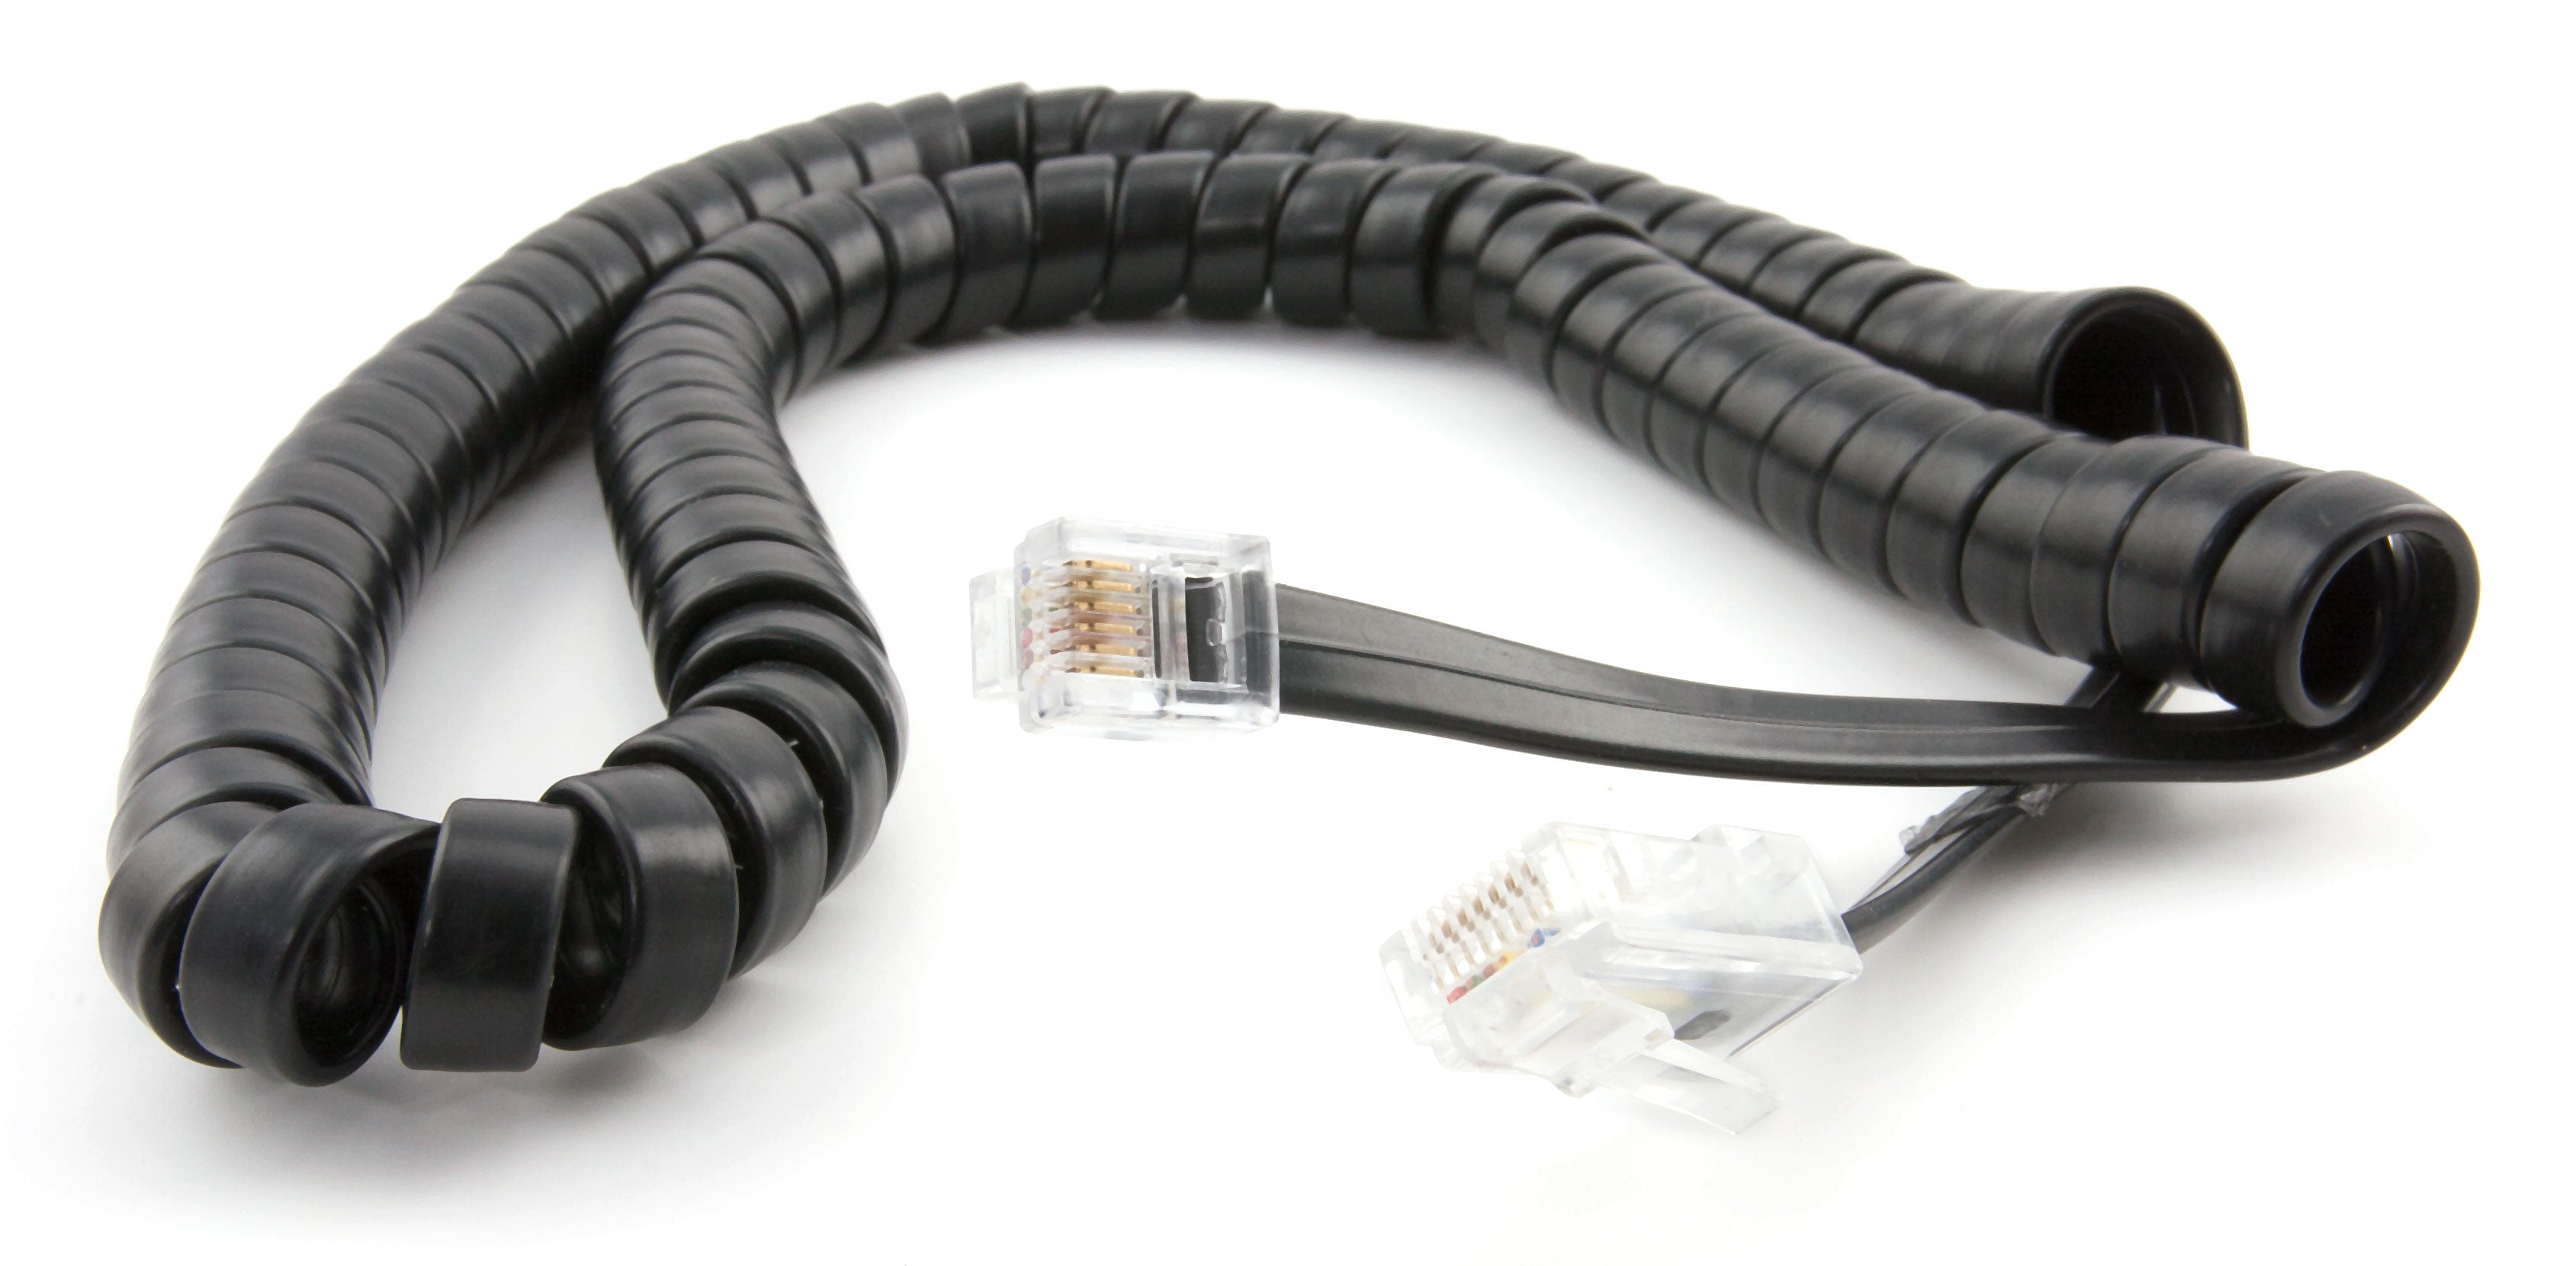 Product Image of SkyWatcher SynScan AZ Handset Cable 20160